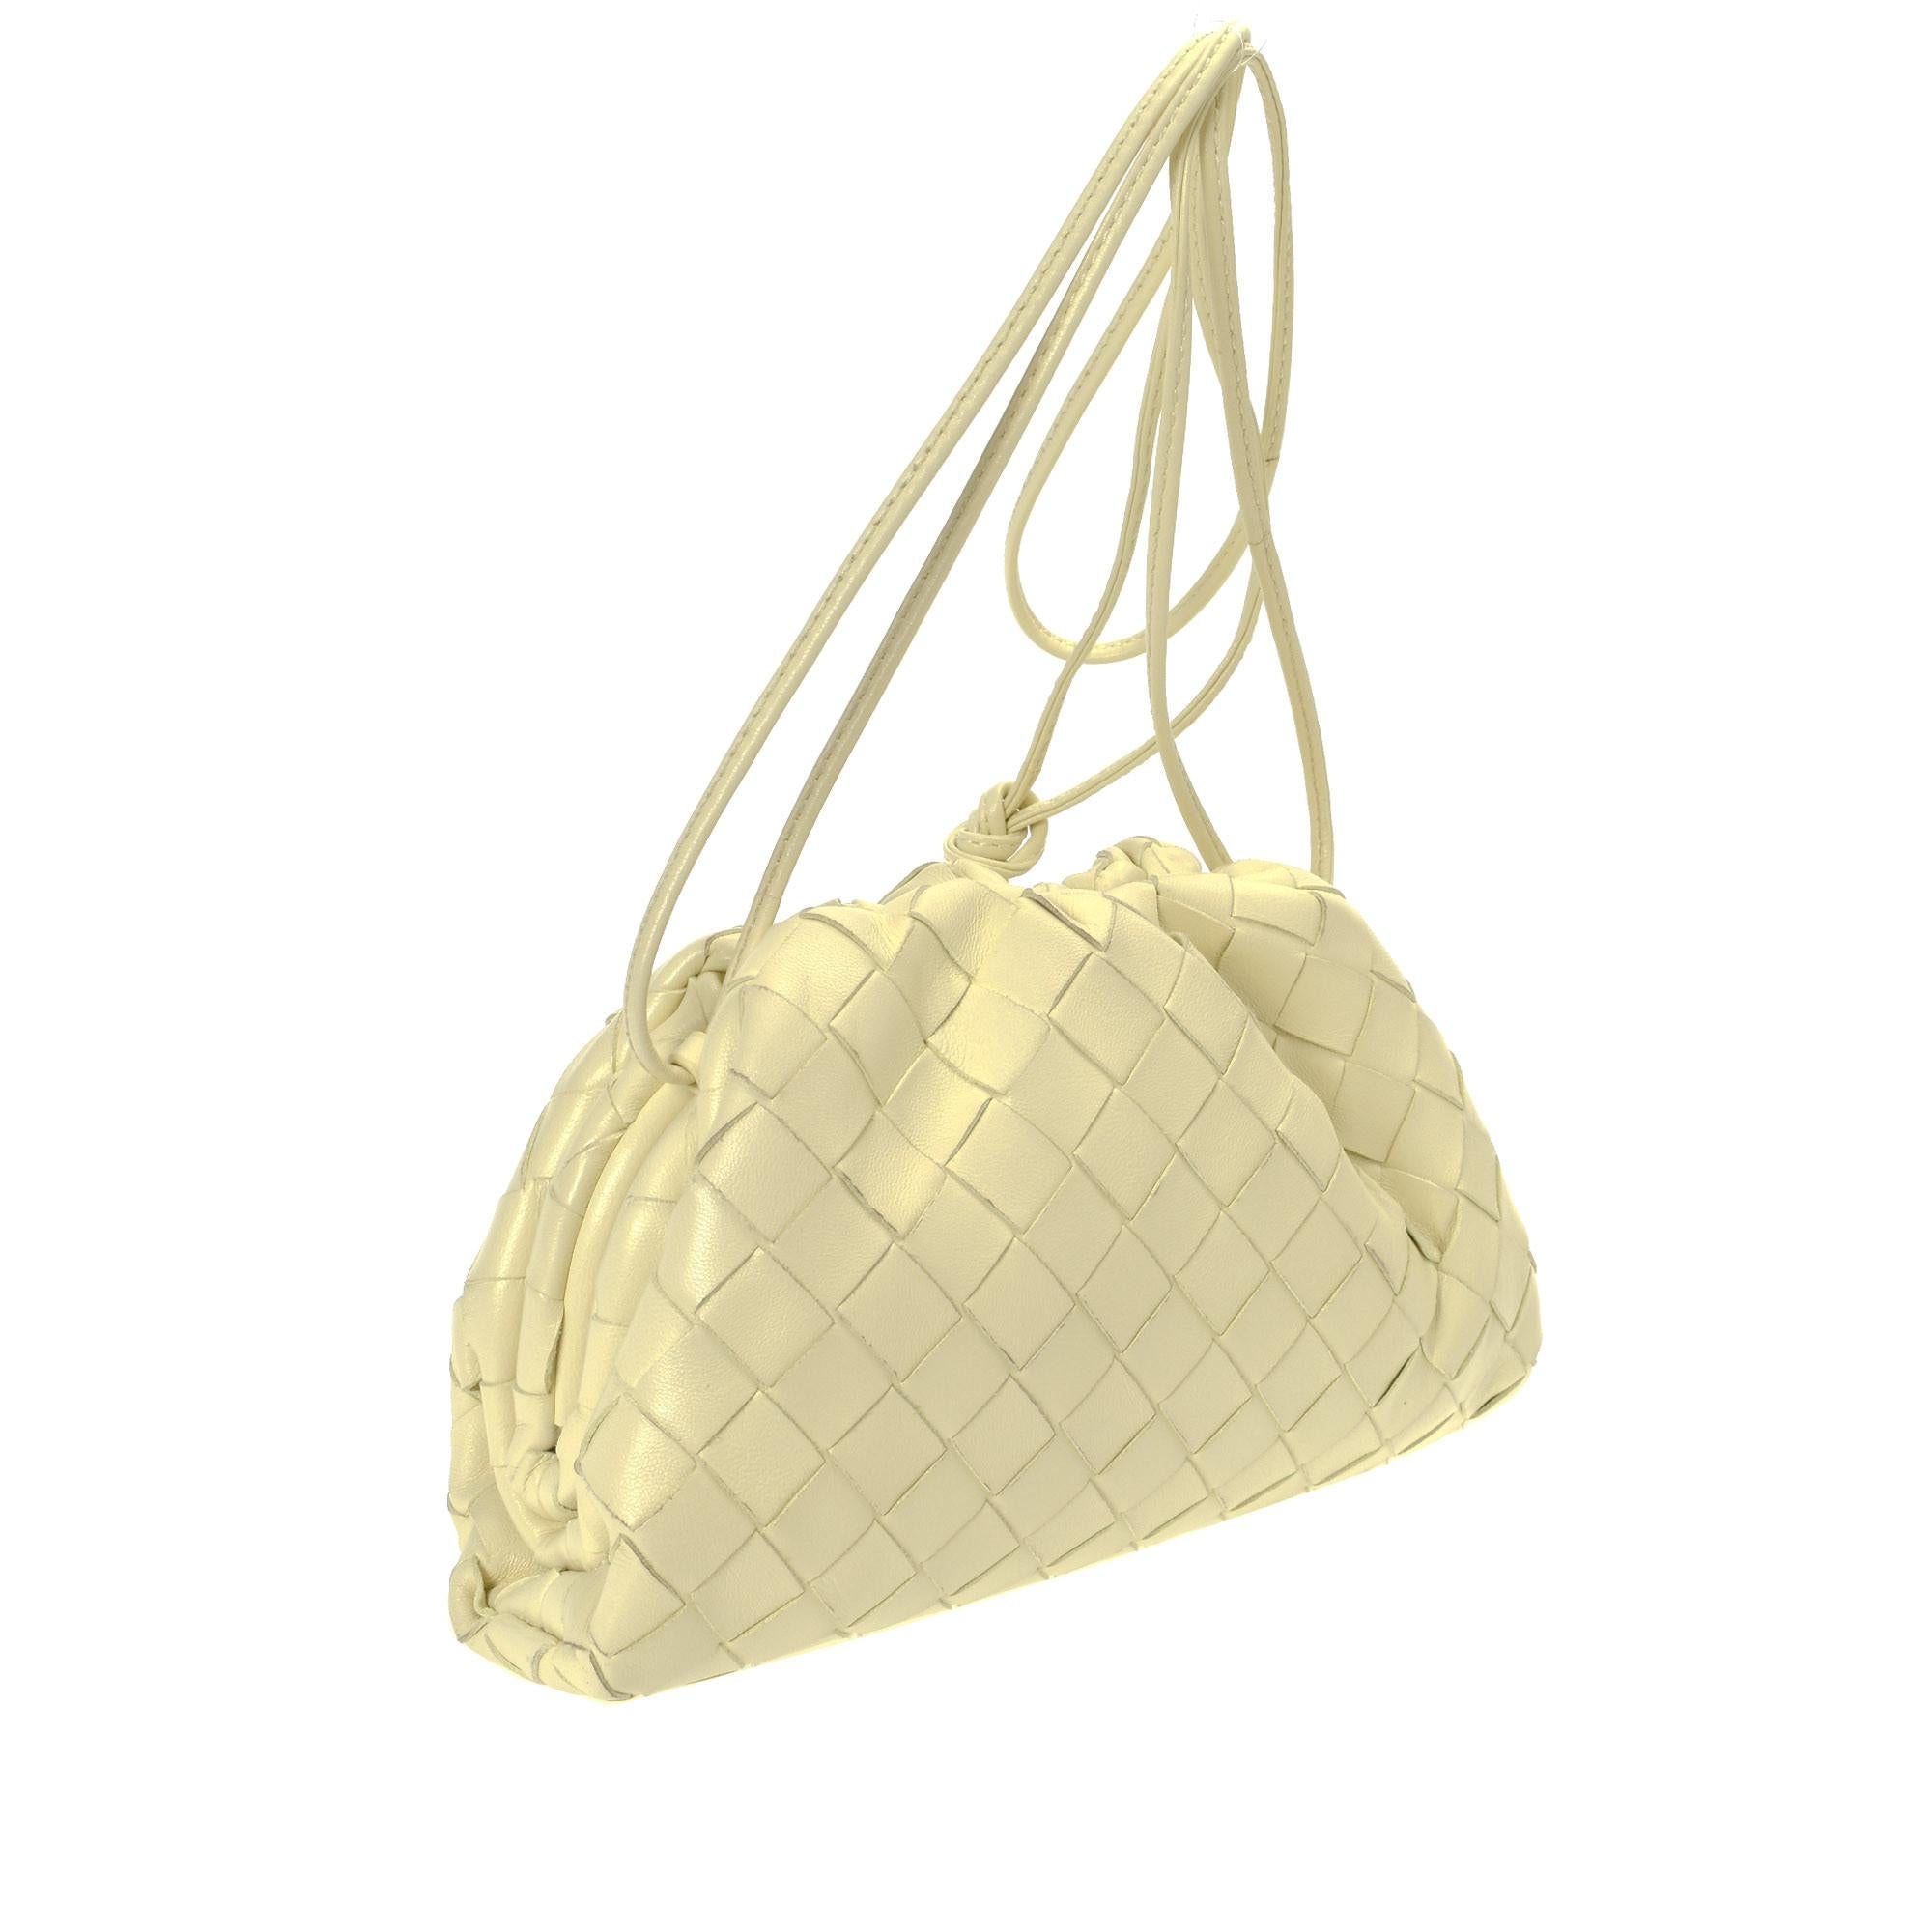 Vintage Bottega Veneta Mini Pouch in soft yellow leather. Perfect for summer! Authenticated by LXRandCo. 
